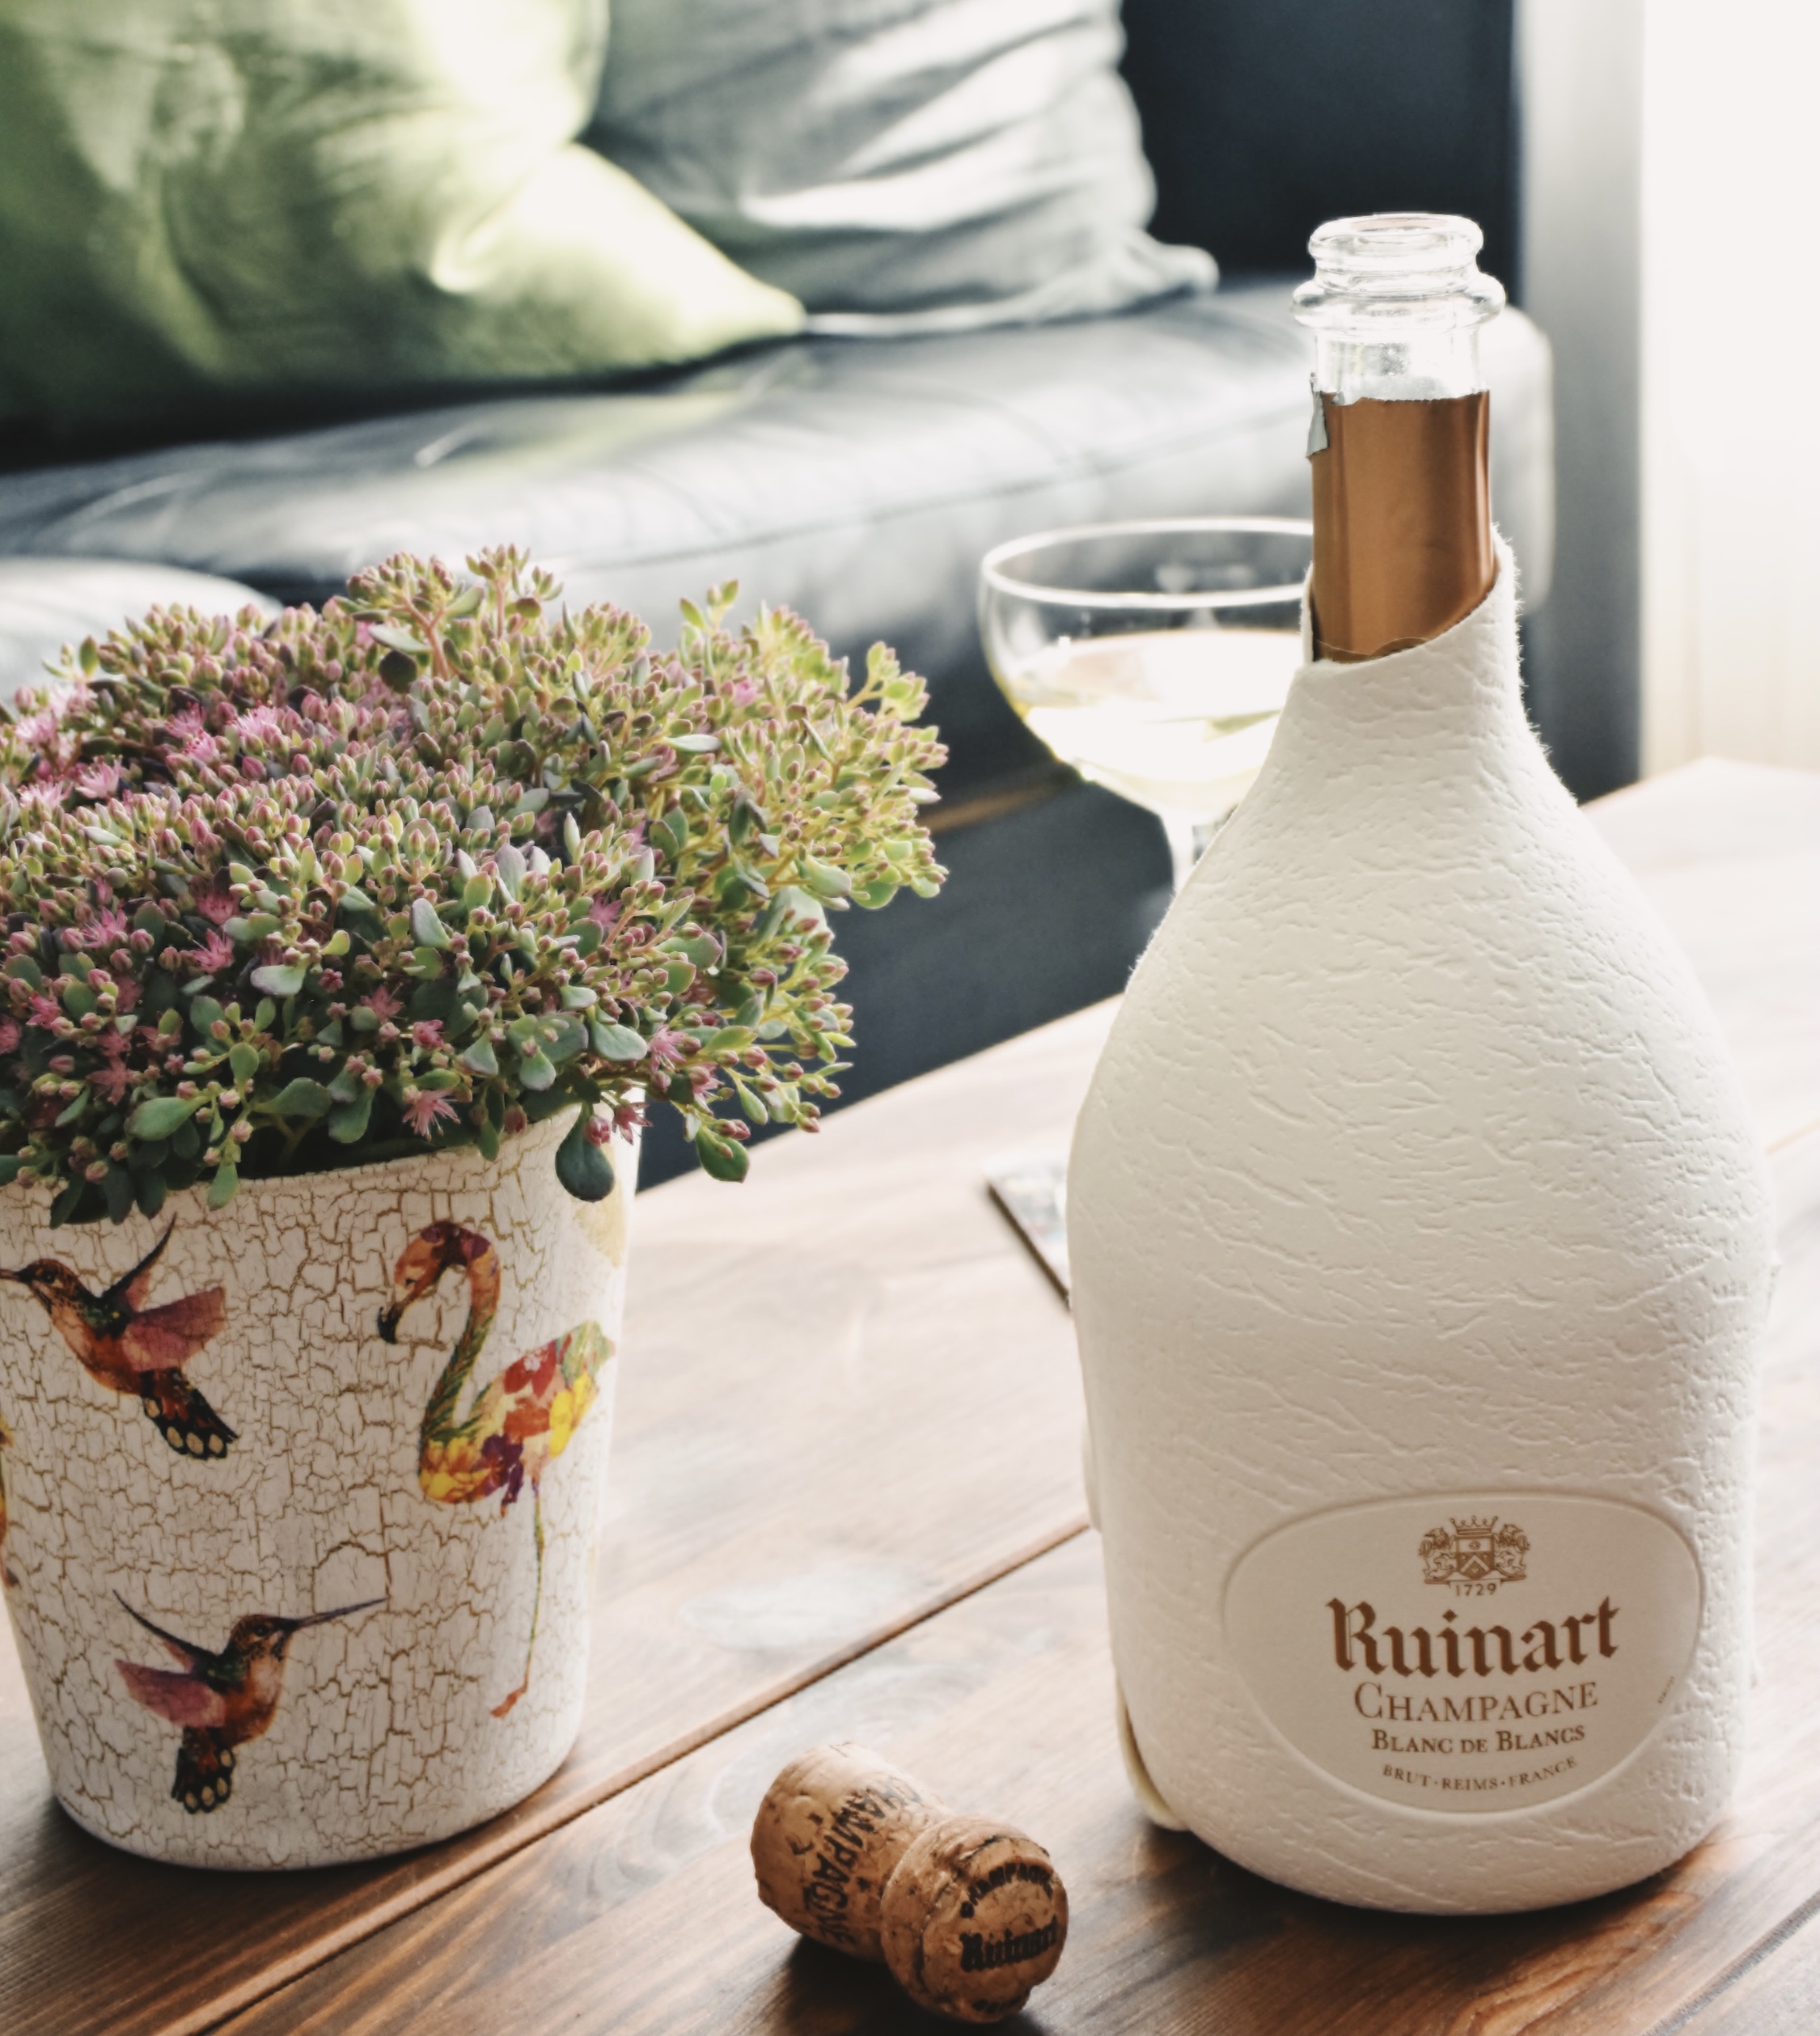 Ruinart's Second Skin is a new innovative recyclable gift packaging